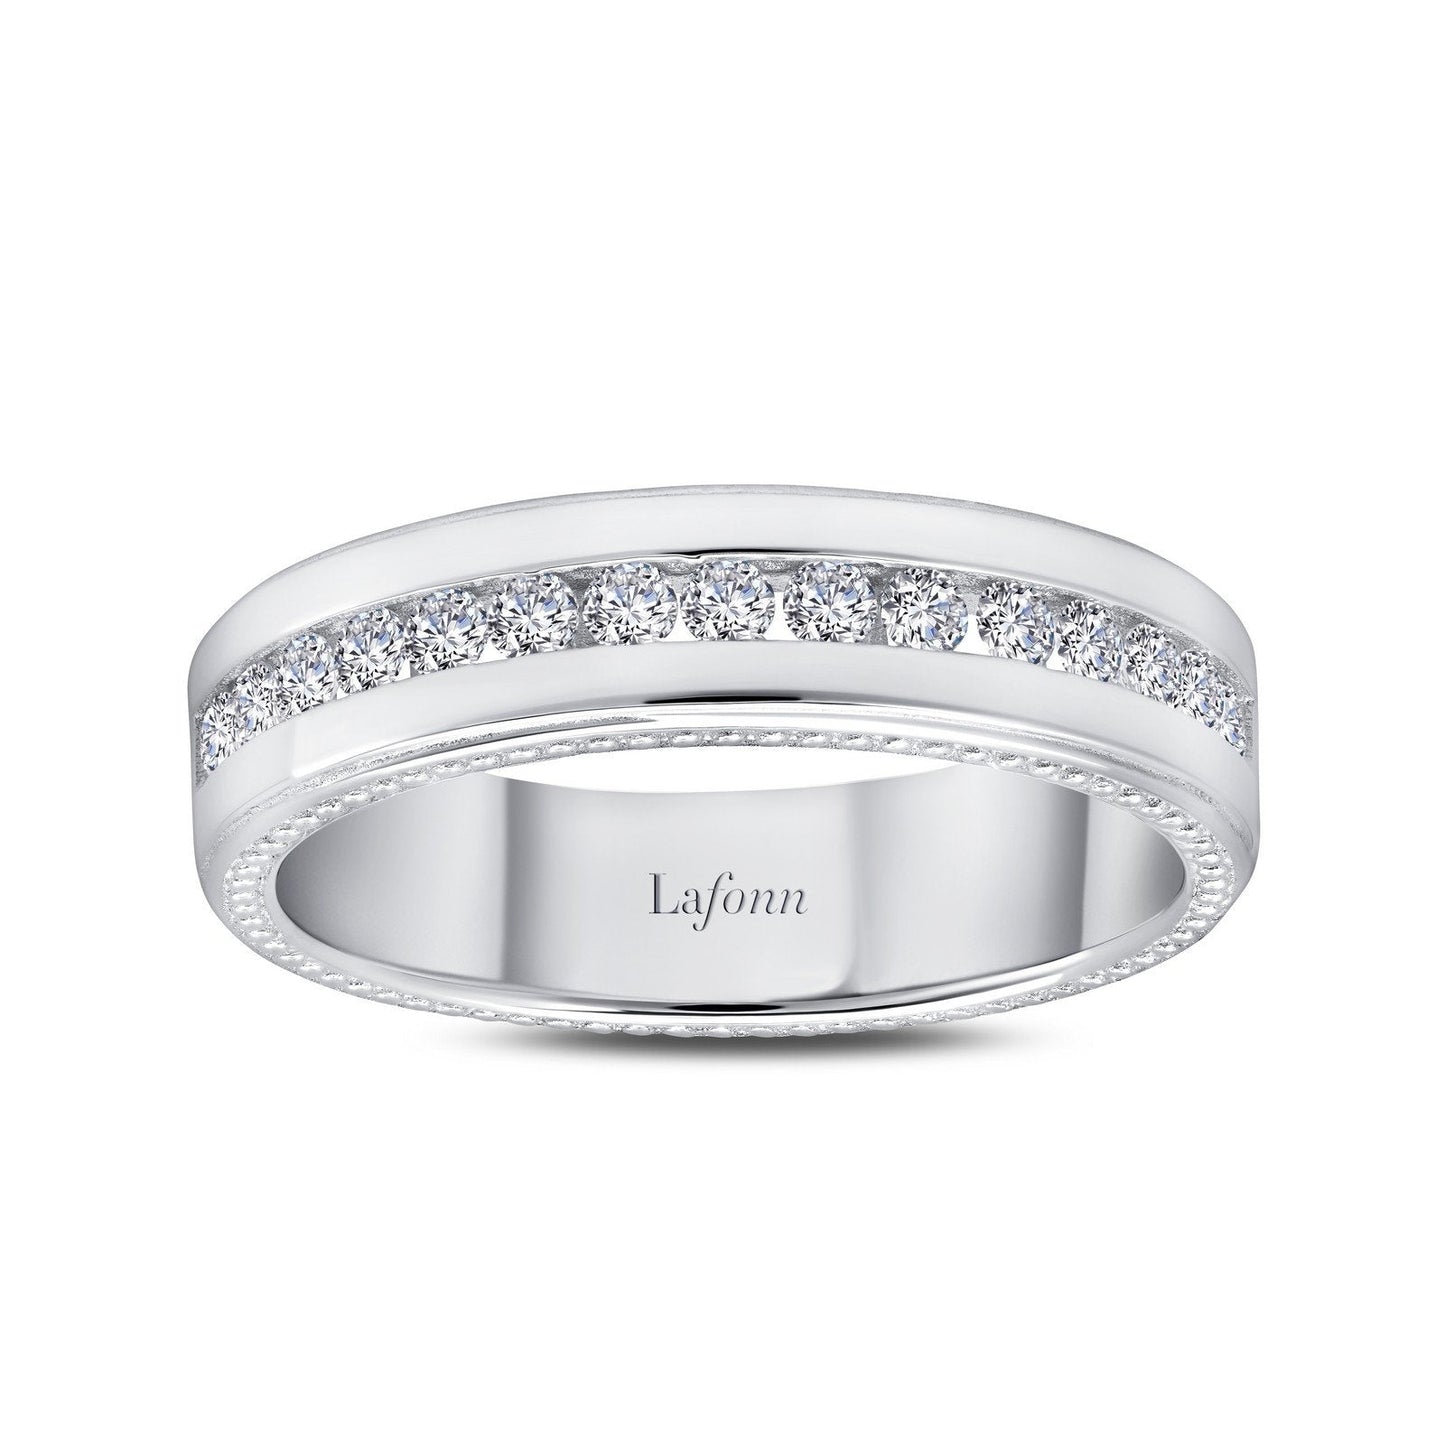 Lafonn 0.45 CTW Men's Eternity Band Simulated Diamond RINGS Size 12 Platinum 0.45 CTS Approx. 5.8mm (W)